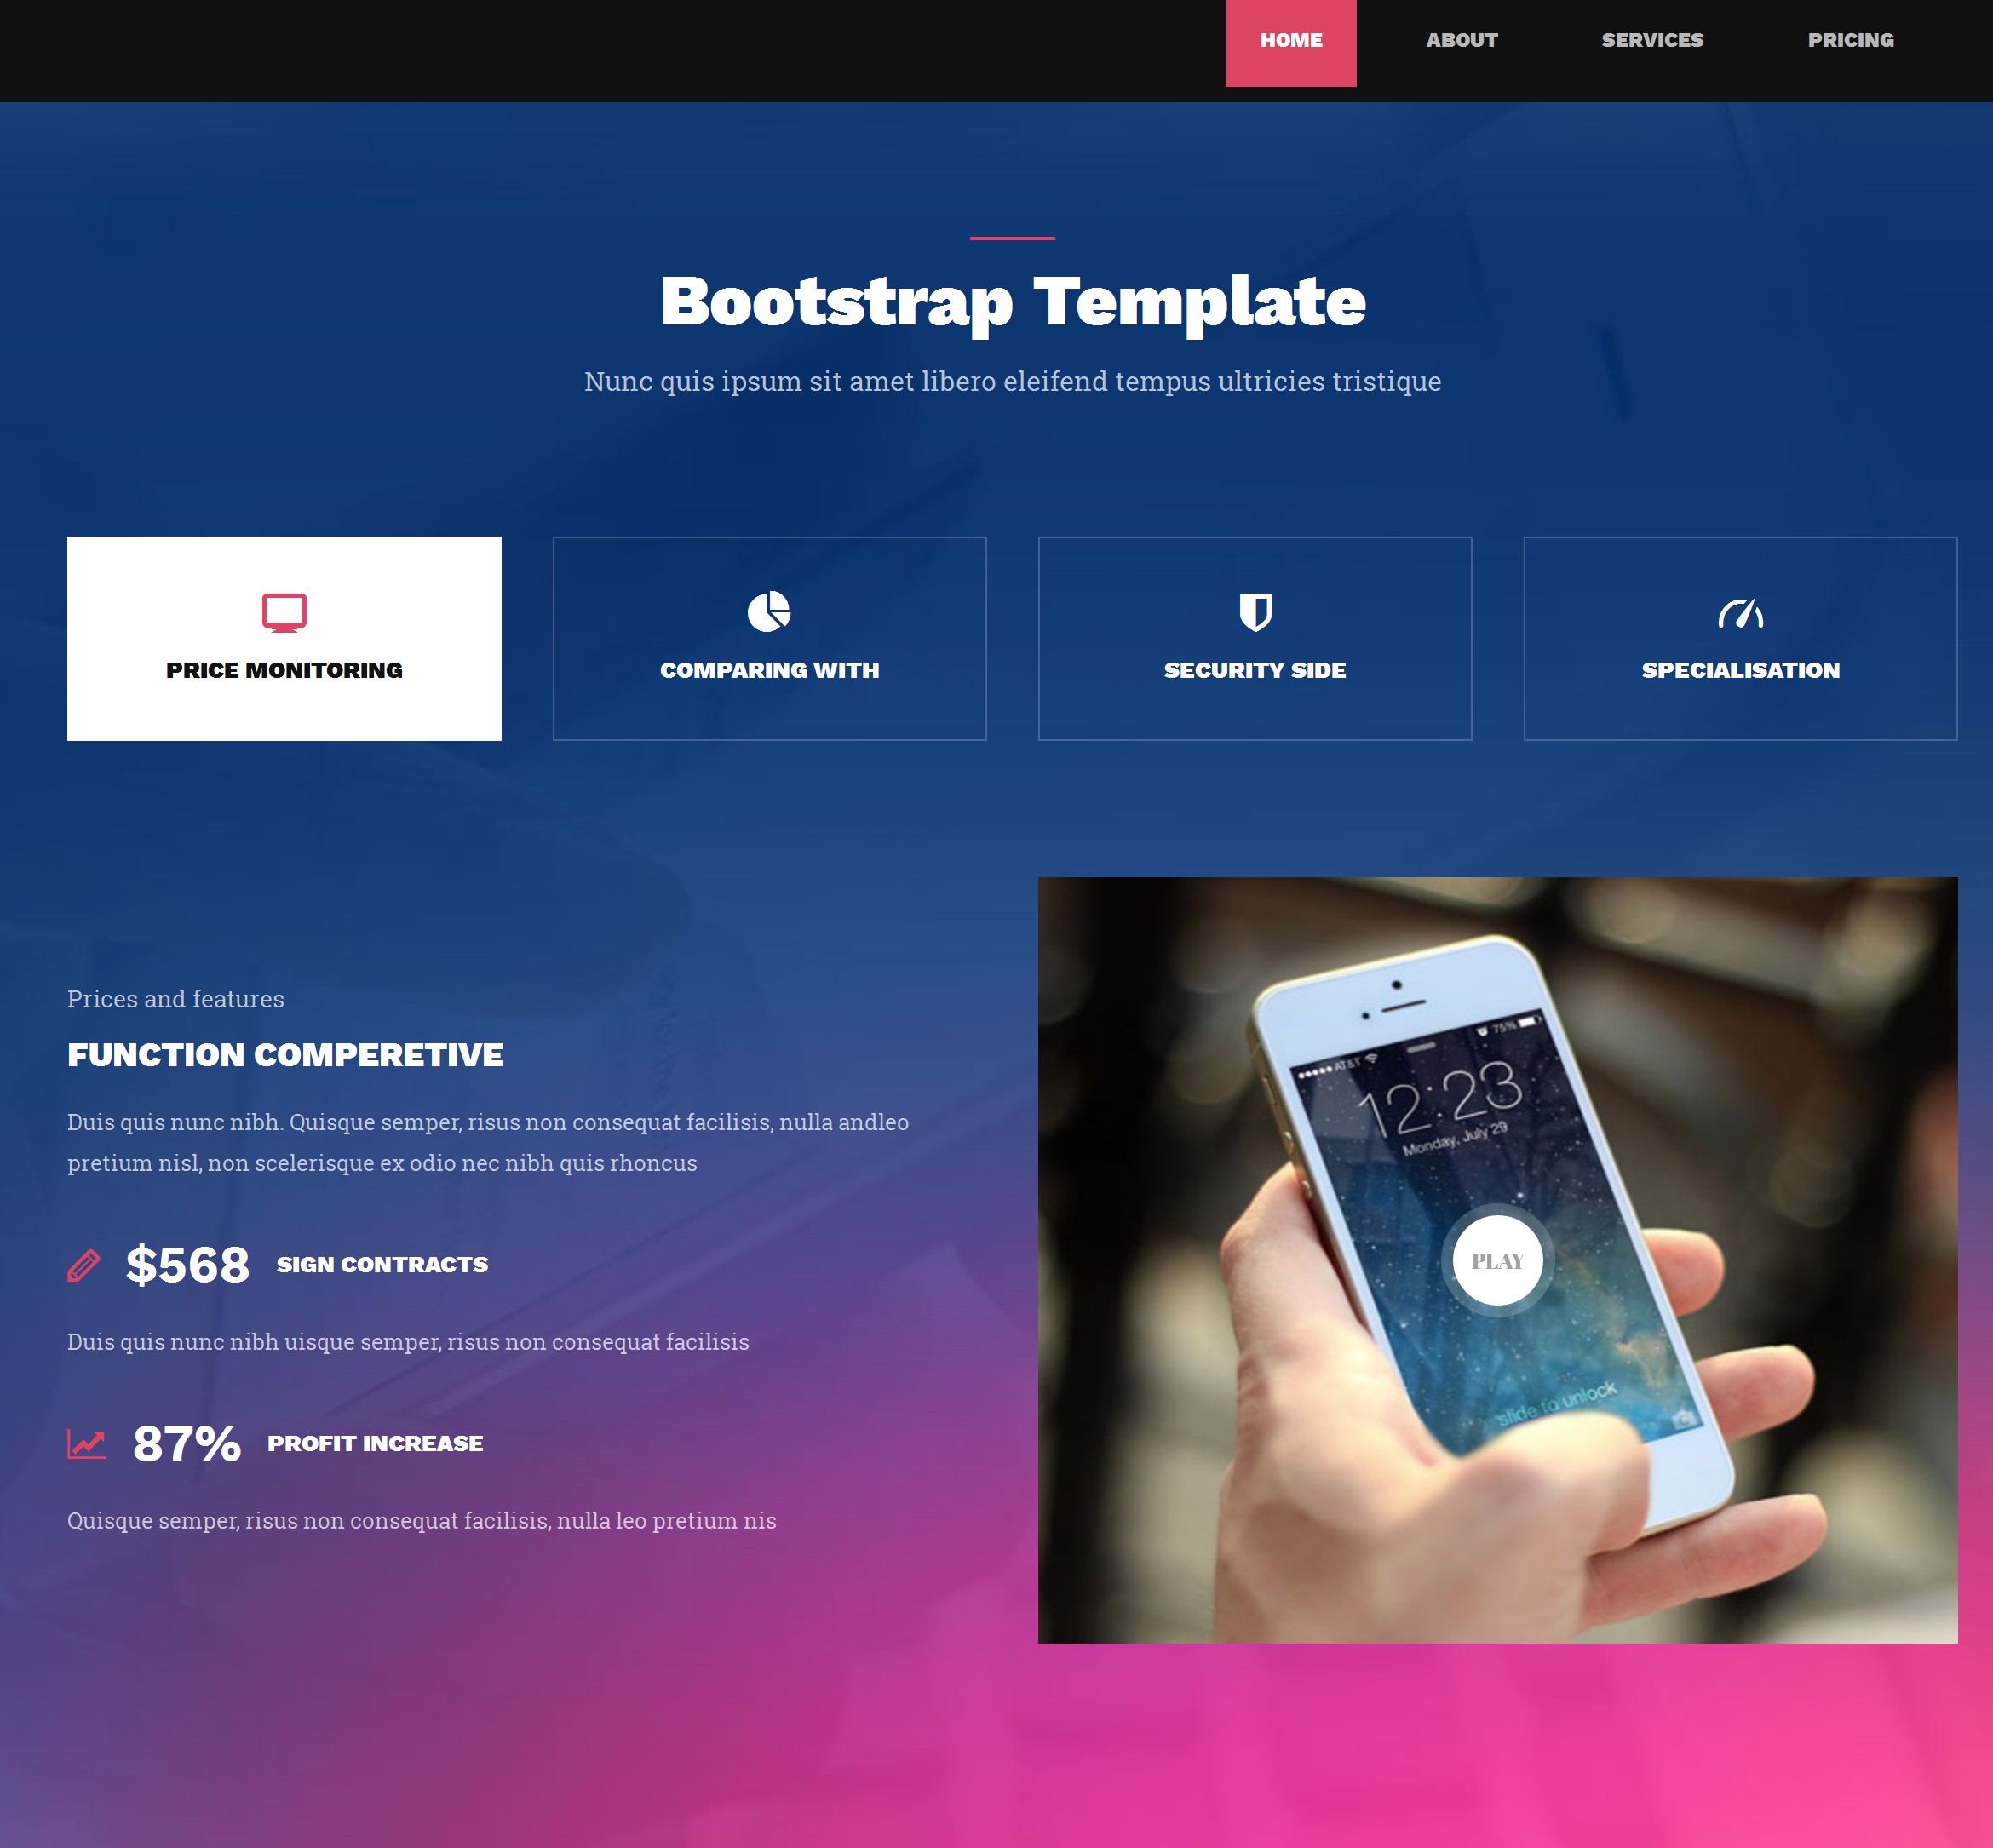 CSS3 Bootstrap Coming Soon Theme